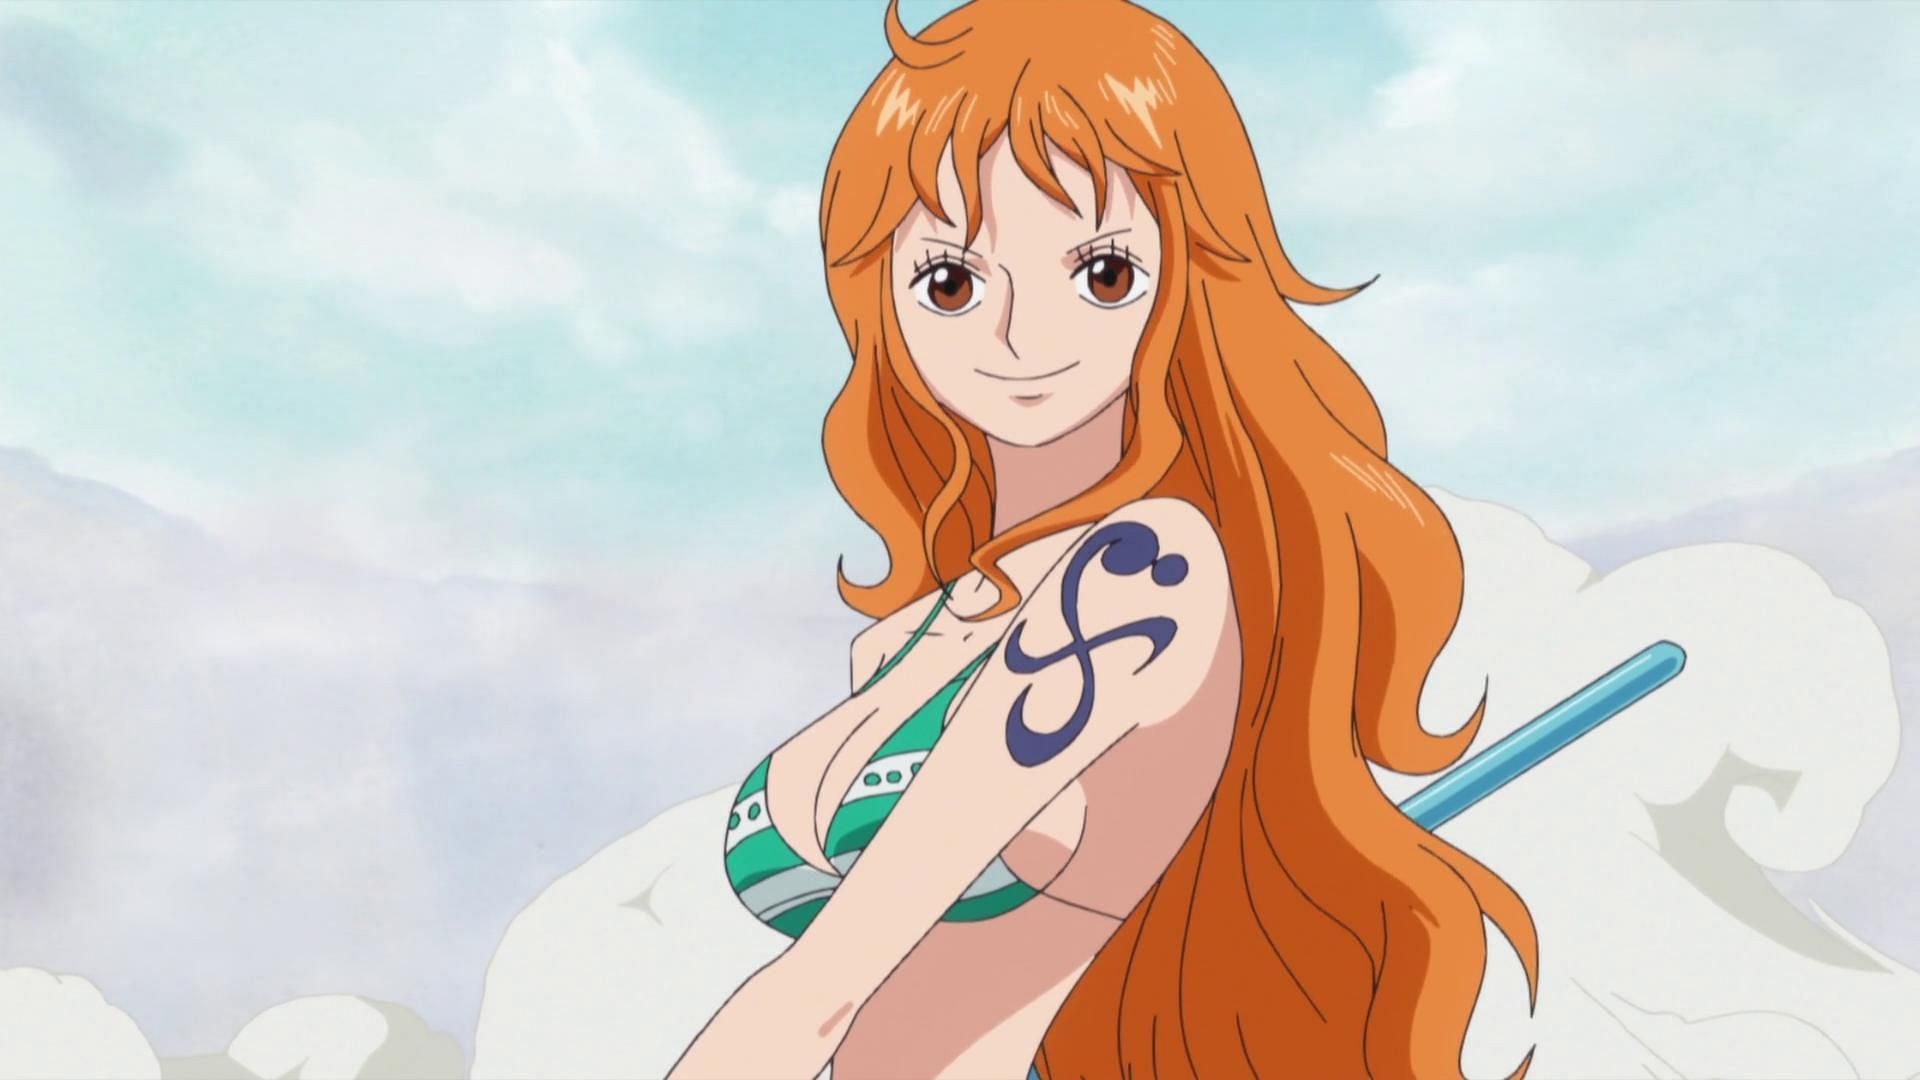 After the time skip, Nami&#039;s appearance slightly changed (Image via Toei Animation, One Piece)